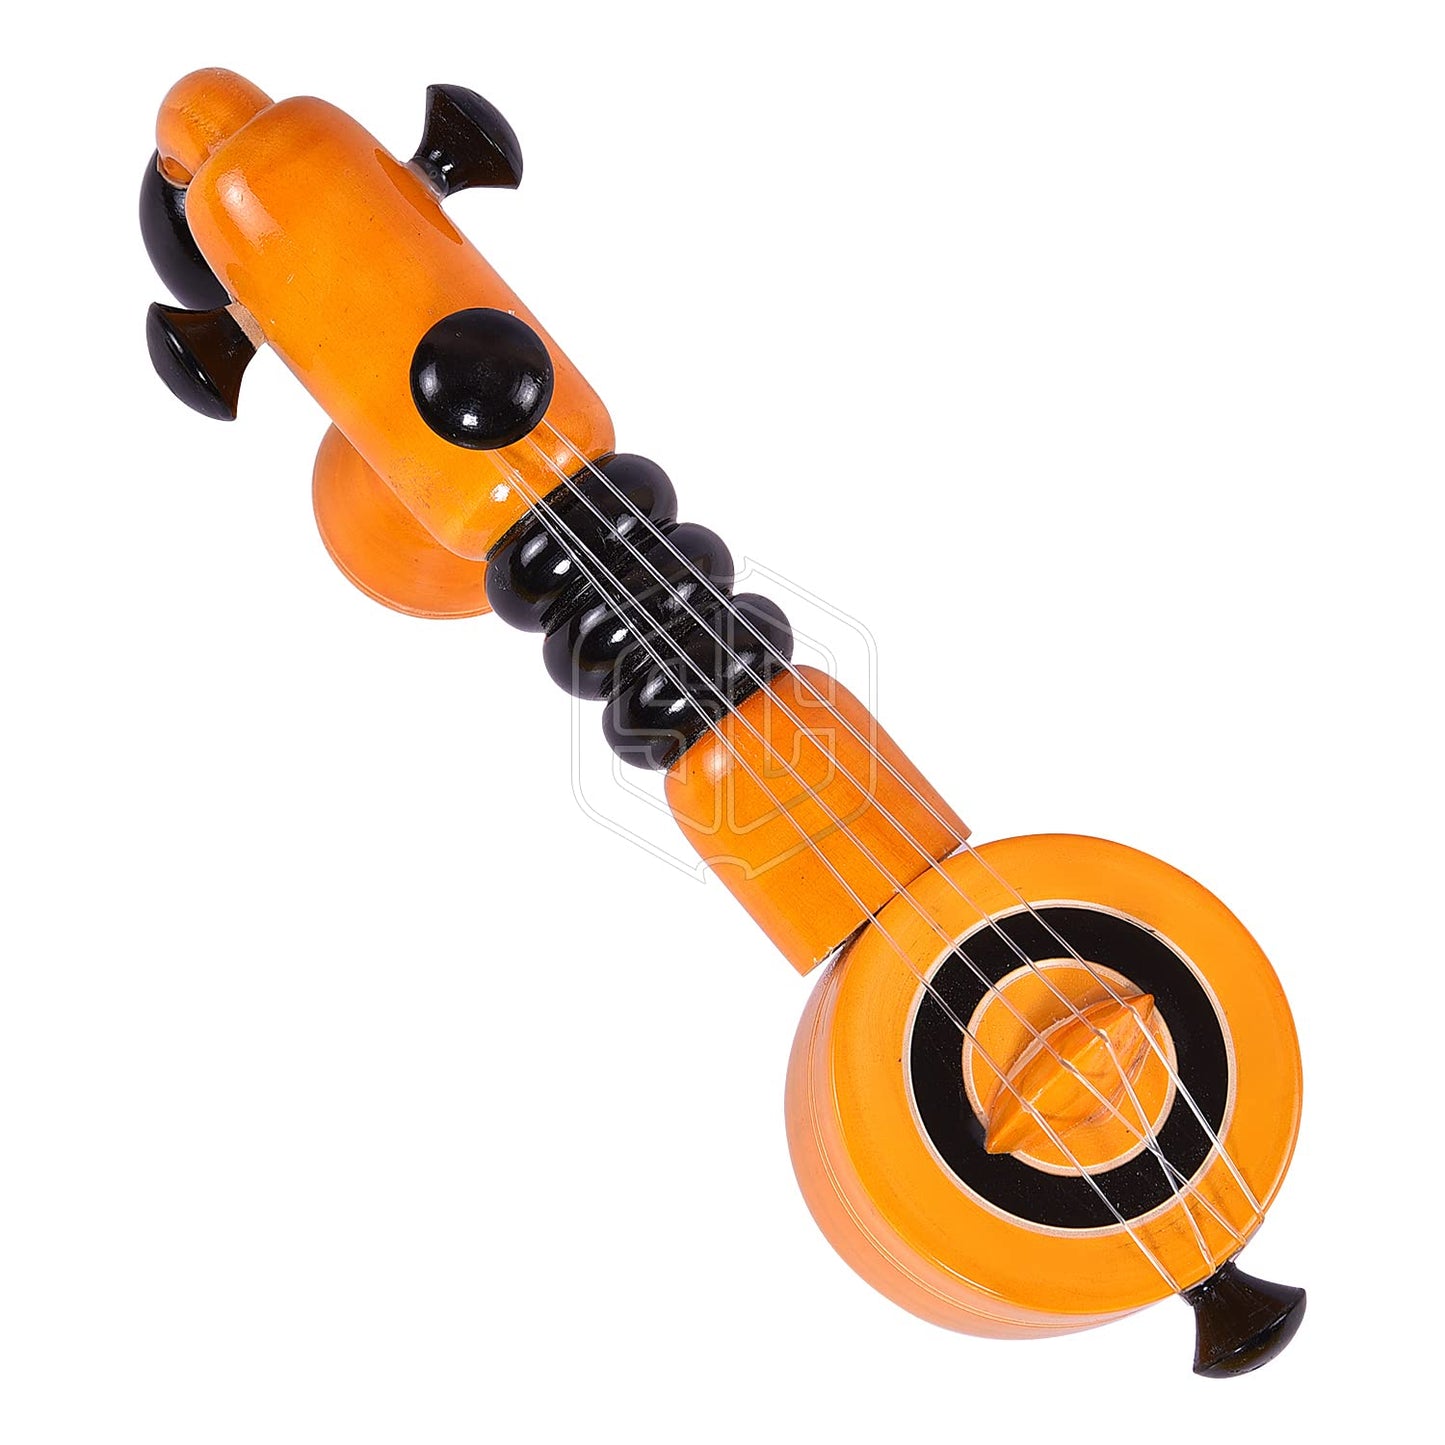 Wooden Toys For Kids, Wooden Veena, Handcrafted Veena, Decorative Indian Traditional Showpiece